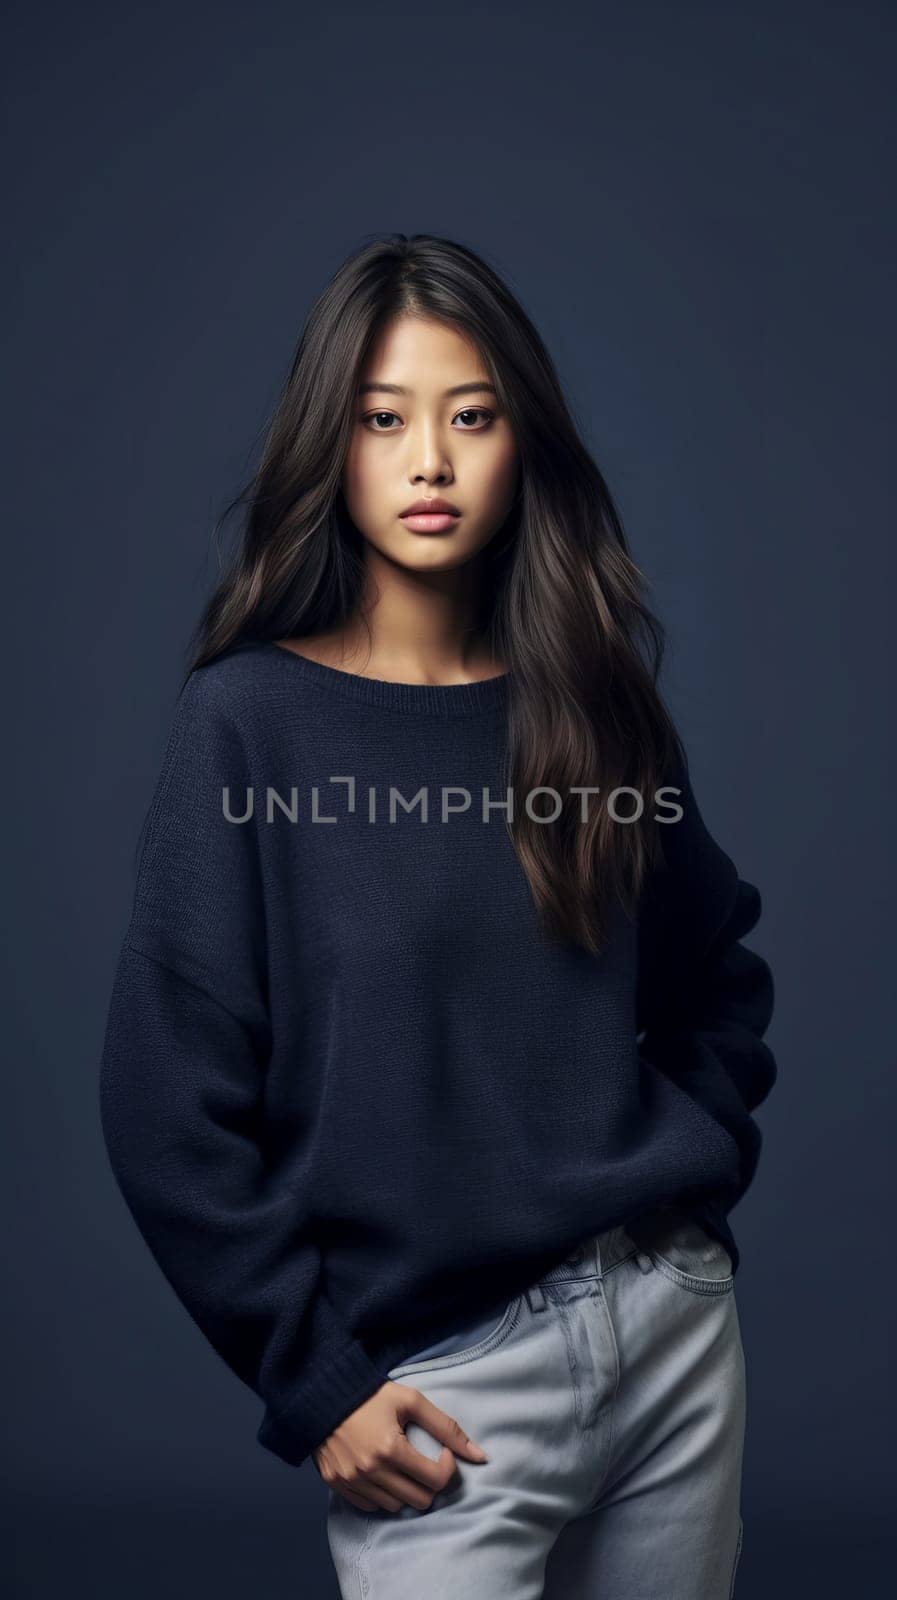 A young asian girl in a dark sweater and light jeans, posing against a dark background